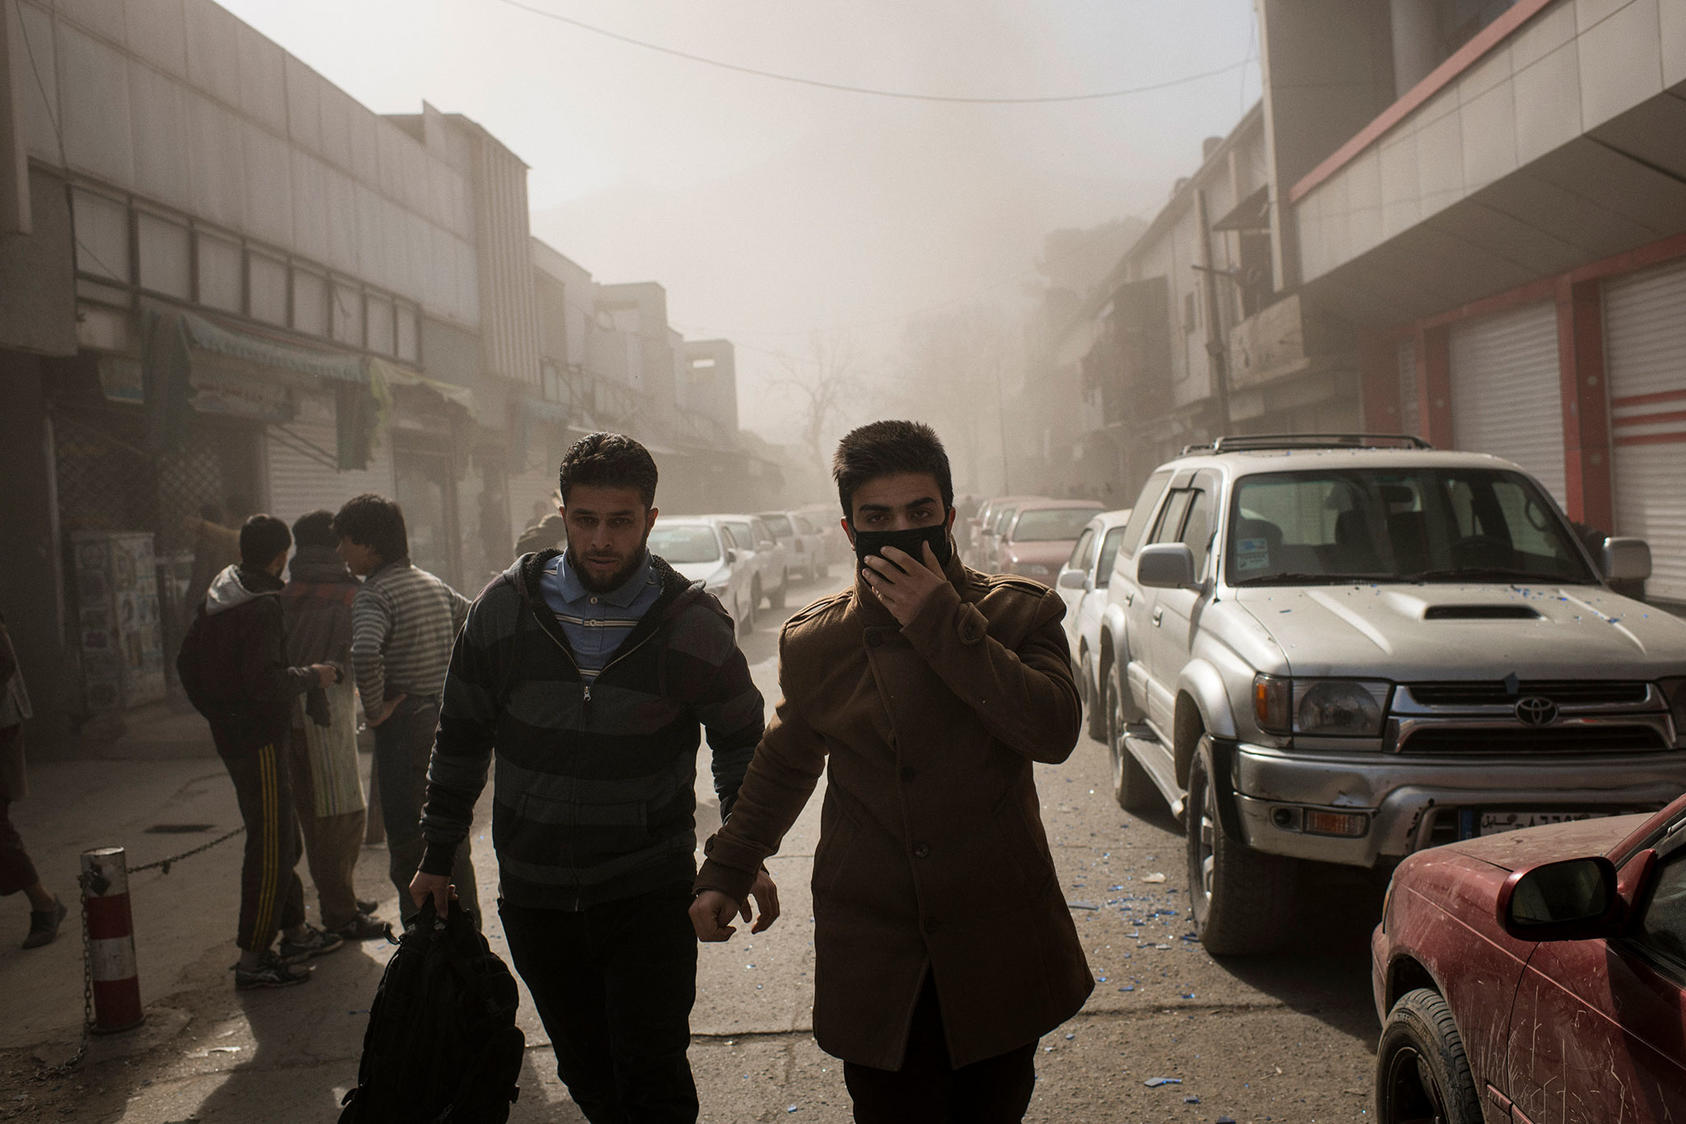 Smoke hangs in the air near the site of a bombing in Kabul, Afghanistan that killed at least 95 people, Jan. 27, 2018